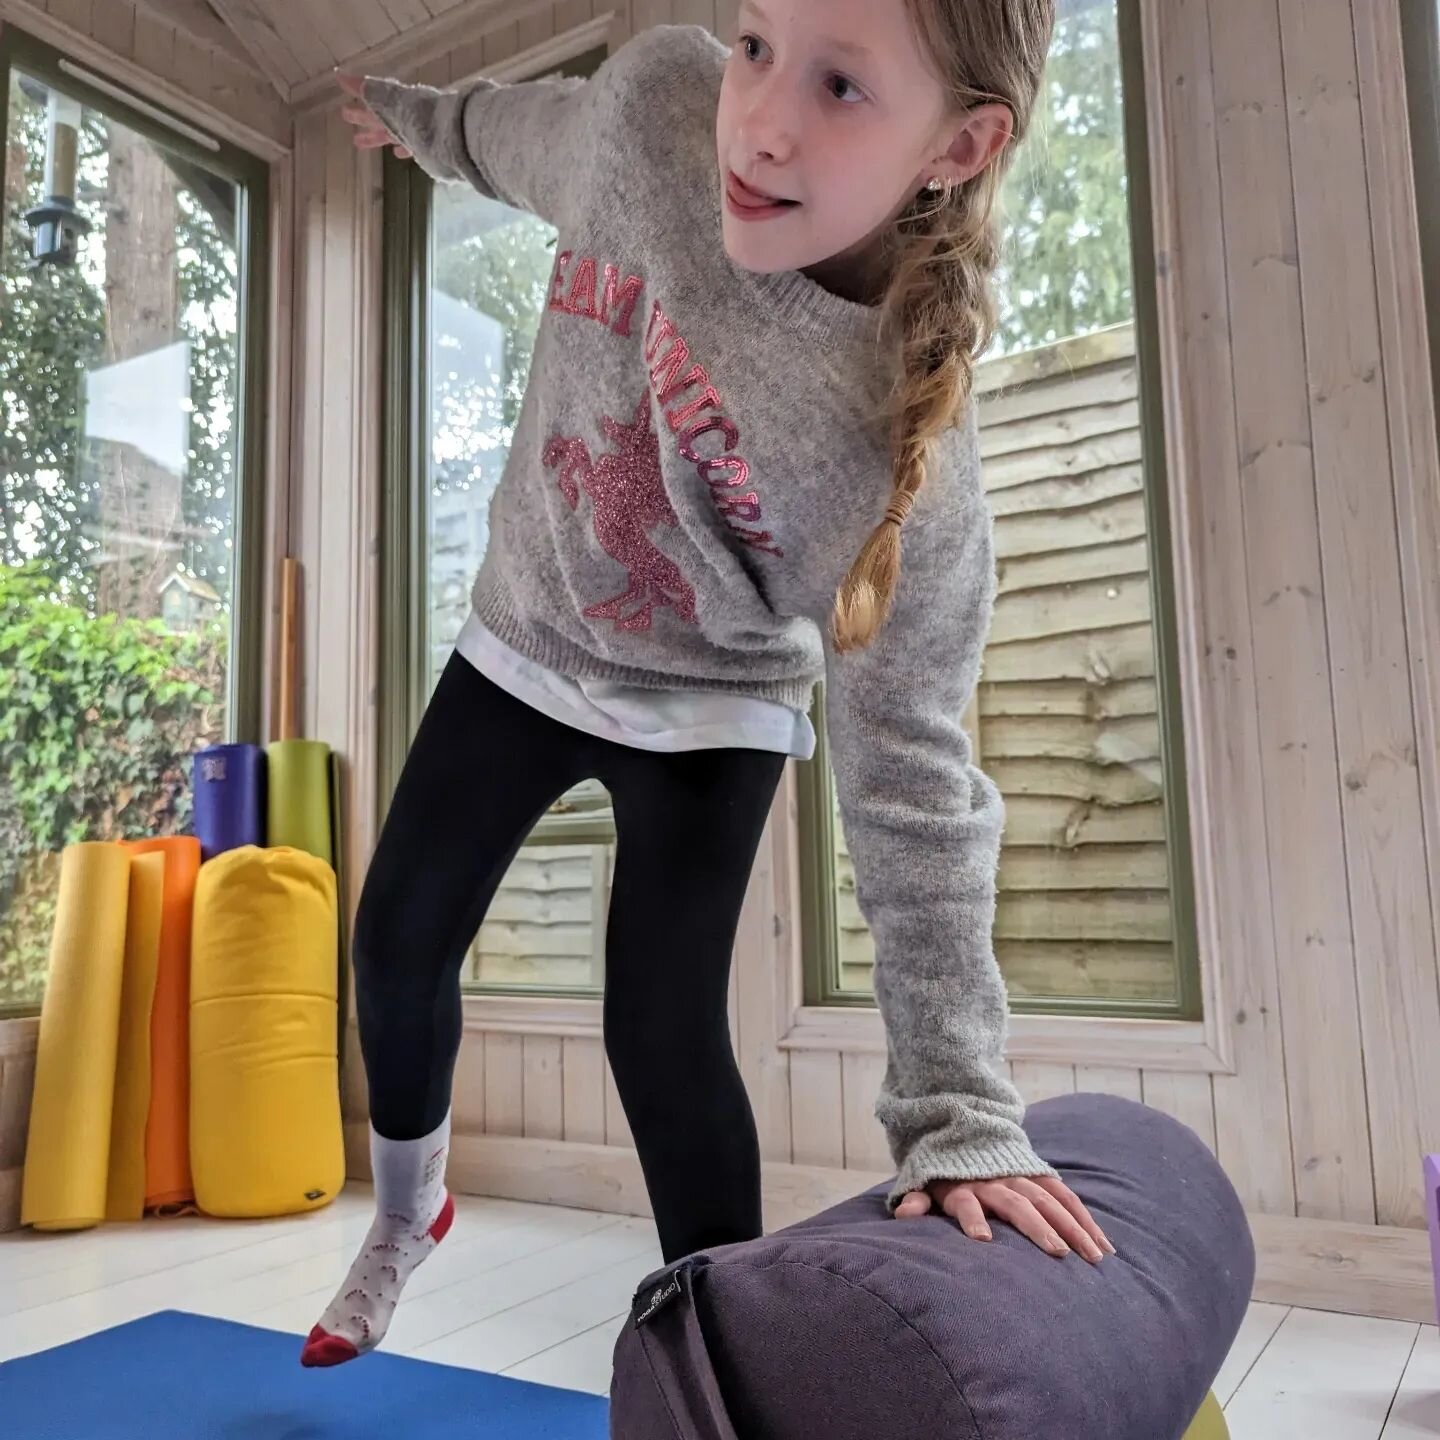 Concentration ✌🏼🕊️

Moving towards ardha chandrasana using a bolster or two instead of the chair. It's harder!! But Ruby's up for the challenge 💥🚀

#yogaforcp #cerebralpalsy #yogaforcerebralpalsy #cpwarrior #yogaforspecialneeds #specialneeds #yog